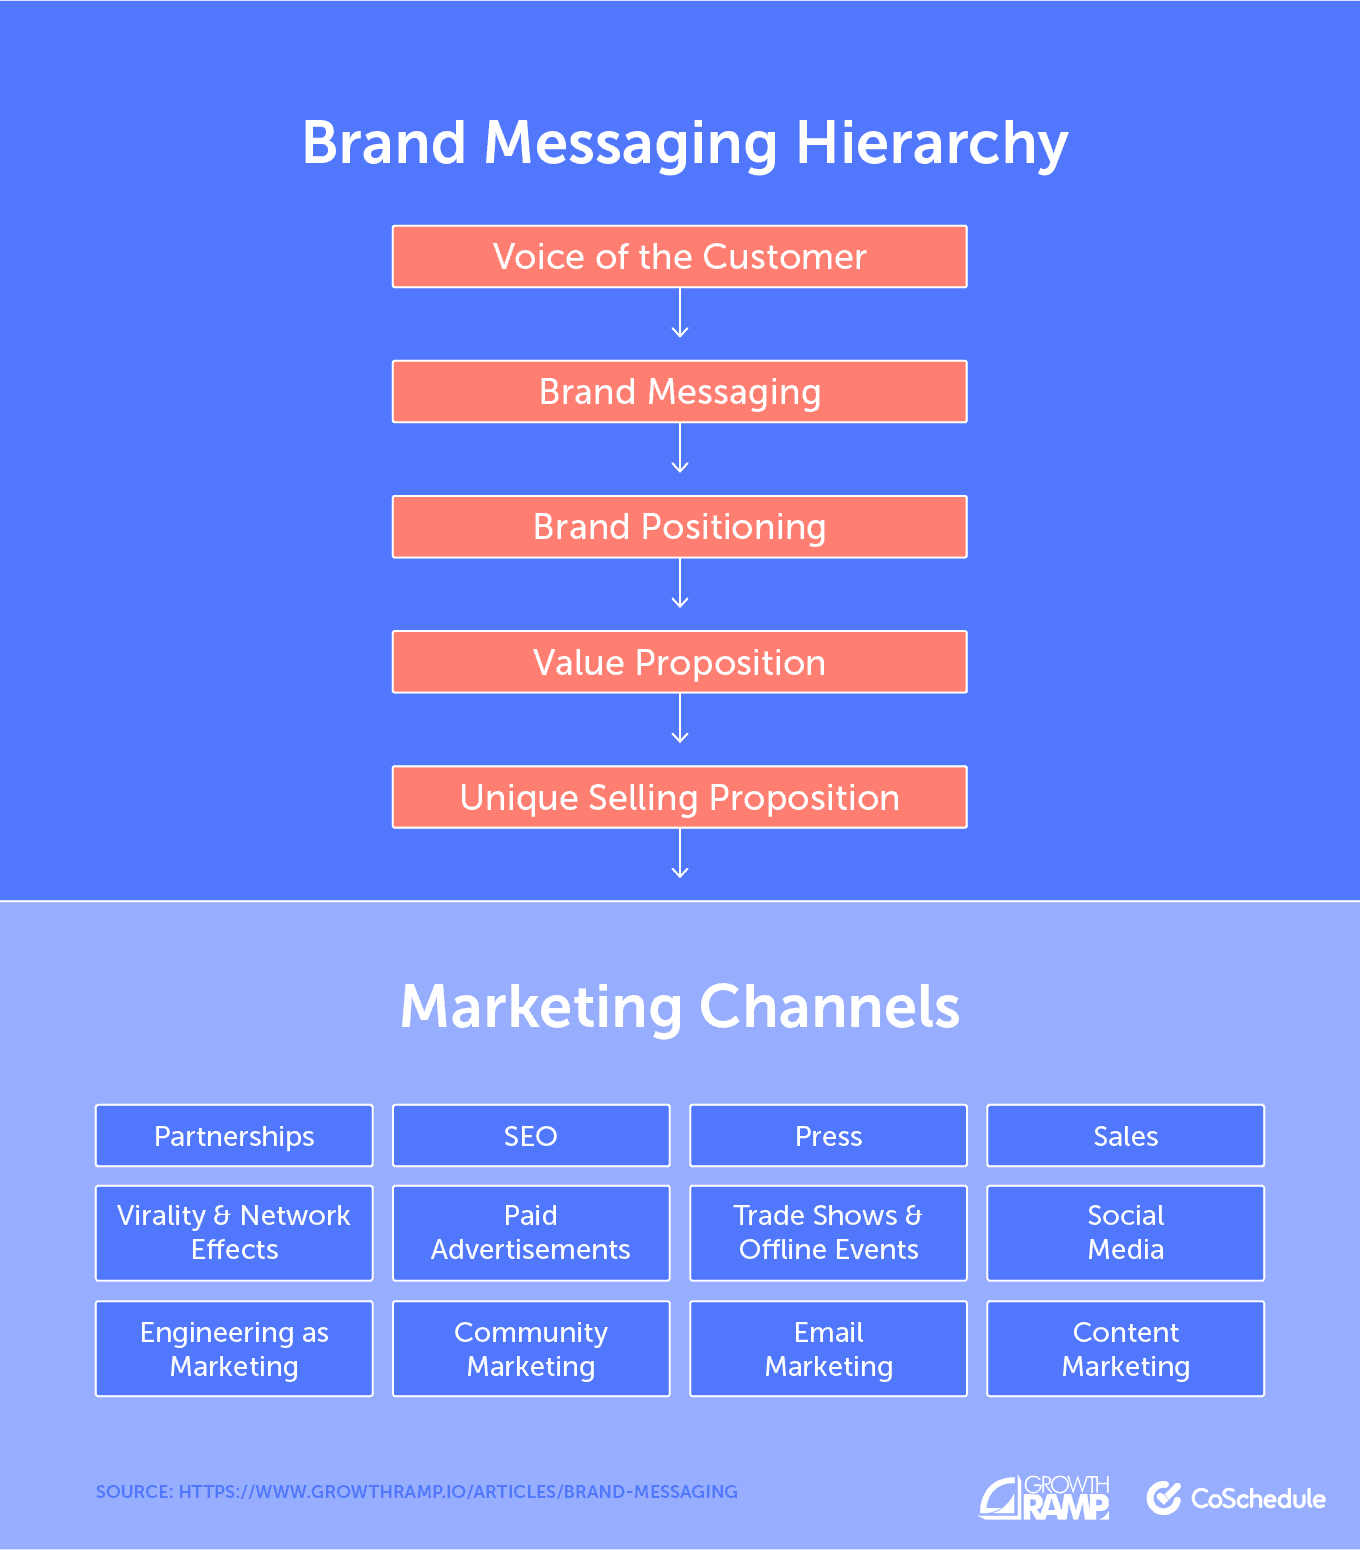 Map of the brand messaging hierarchy and channels